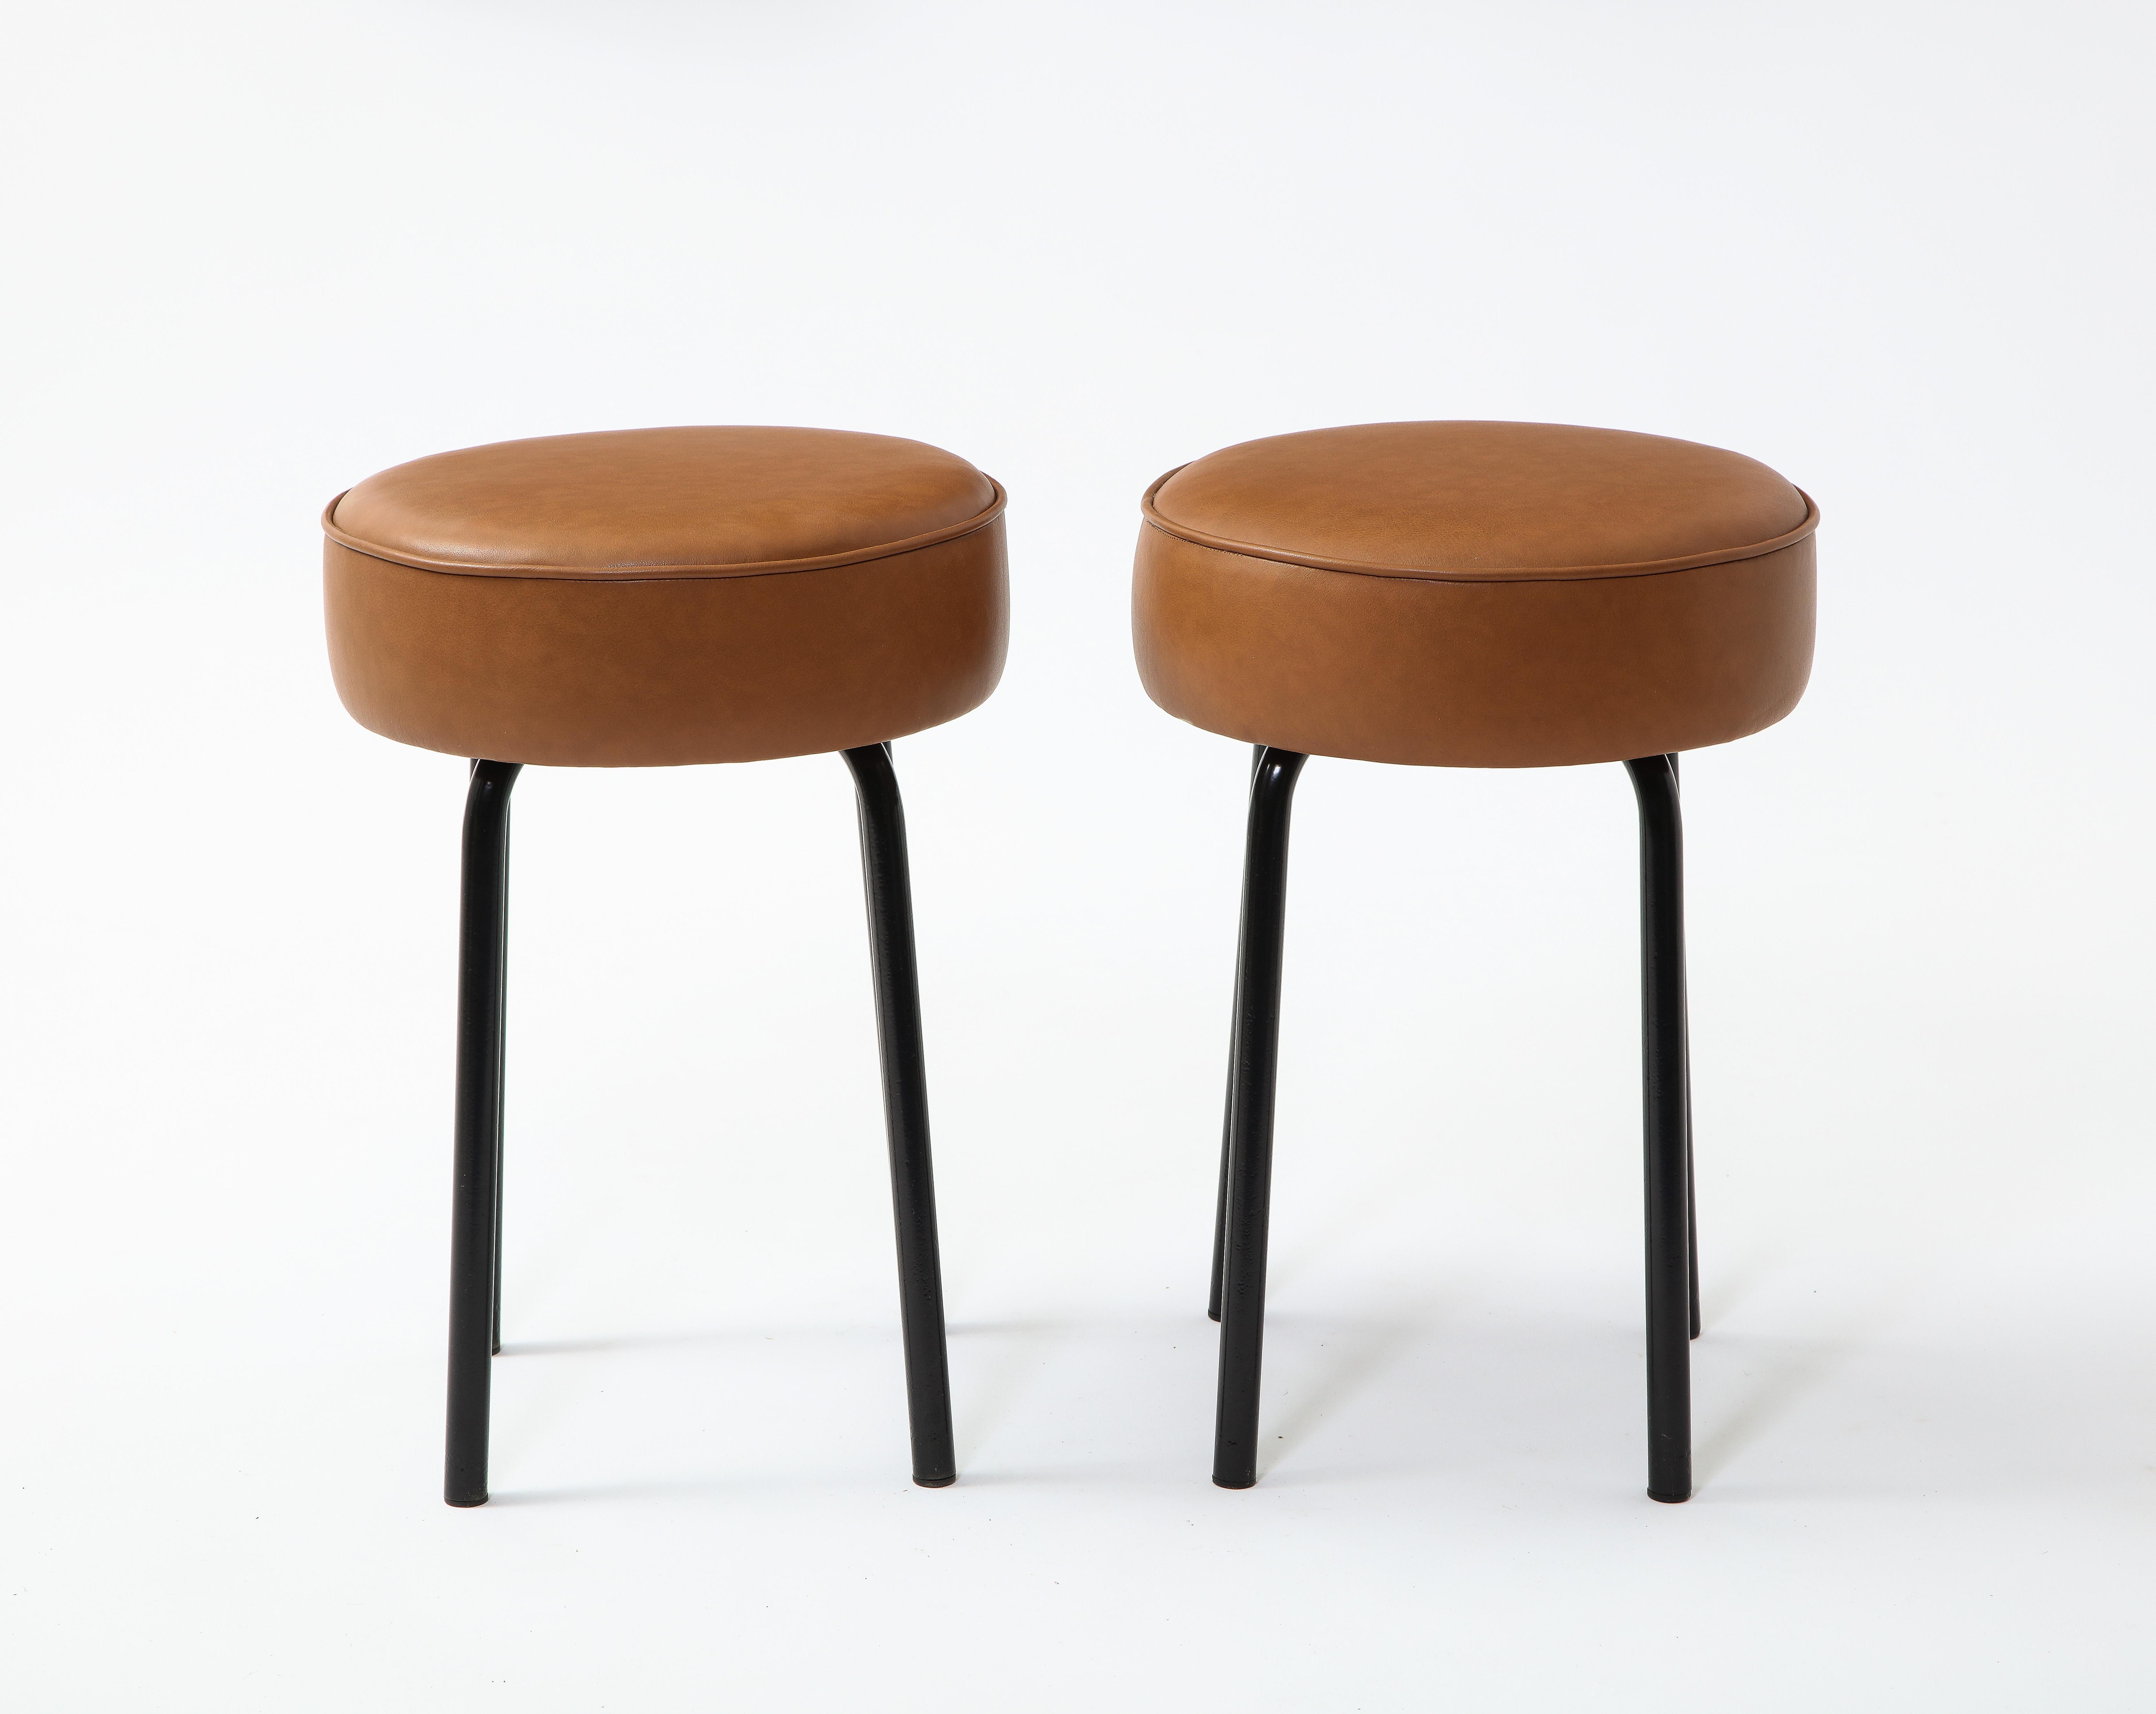 Black enameled base and new leather upholstery on these stools reminiscent of the work of Prouve. Clean industrial lines. 

We are happy to recover these upon request, at additional cost.